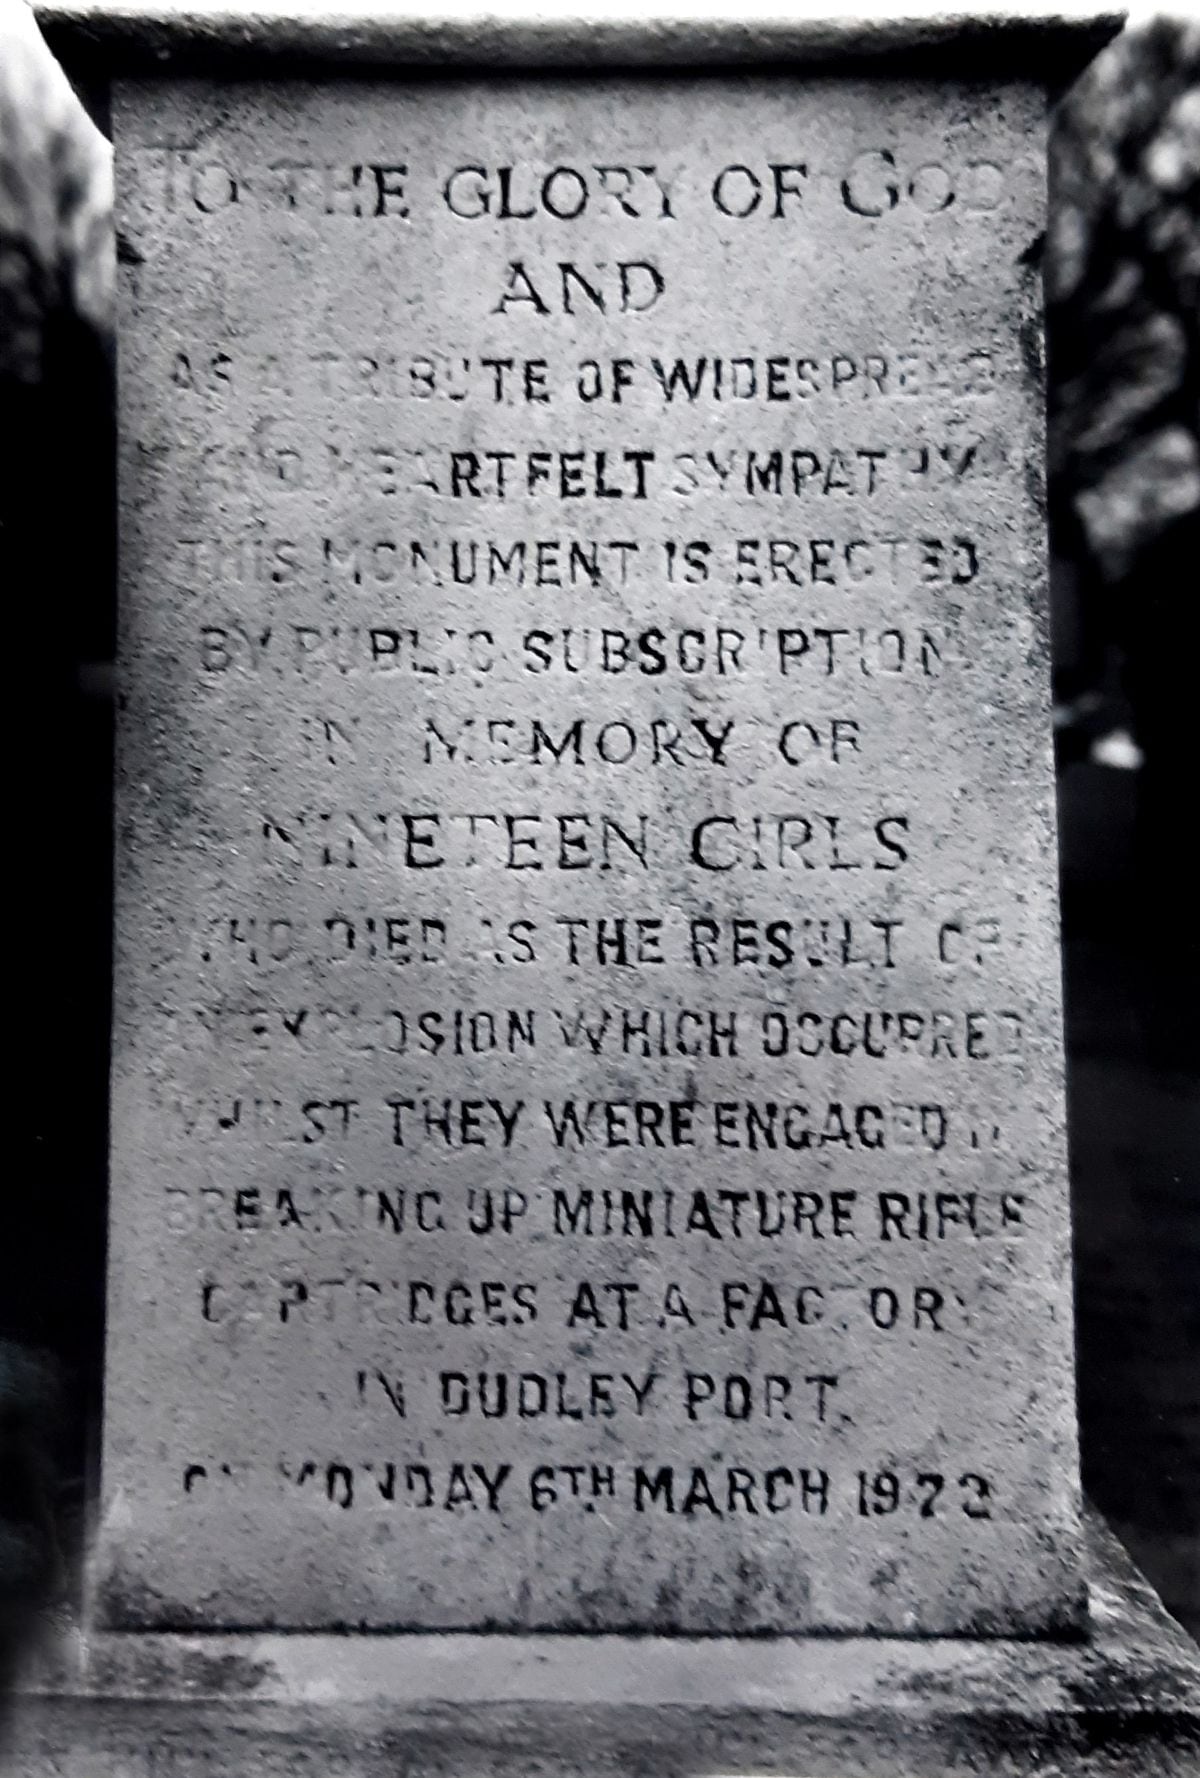 The memorial to the girls at Tipton cemetery